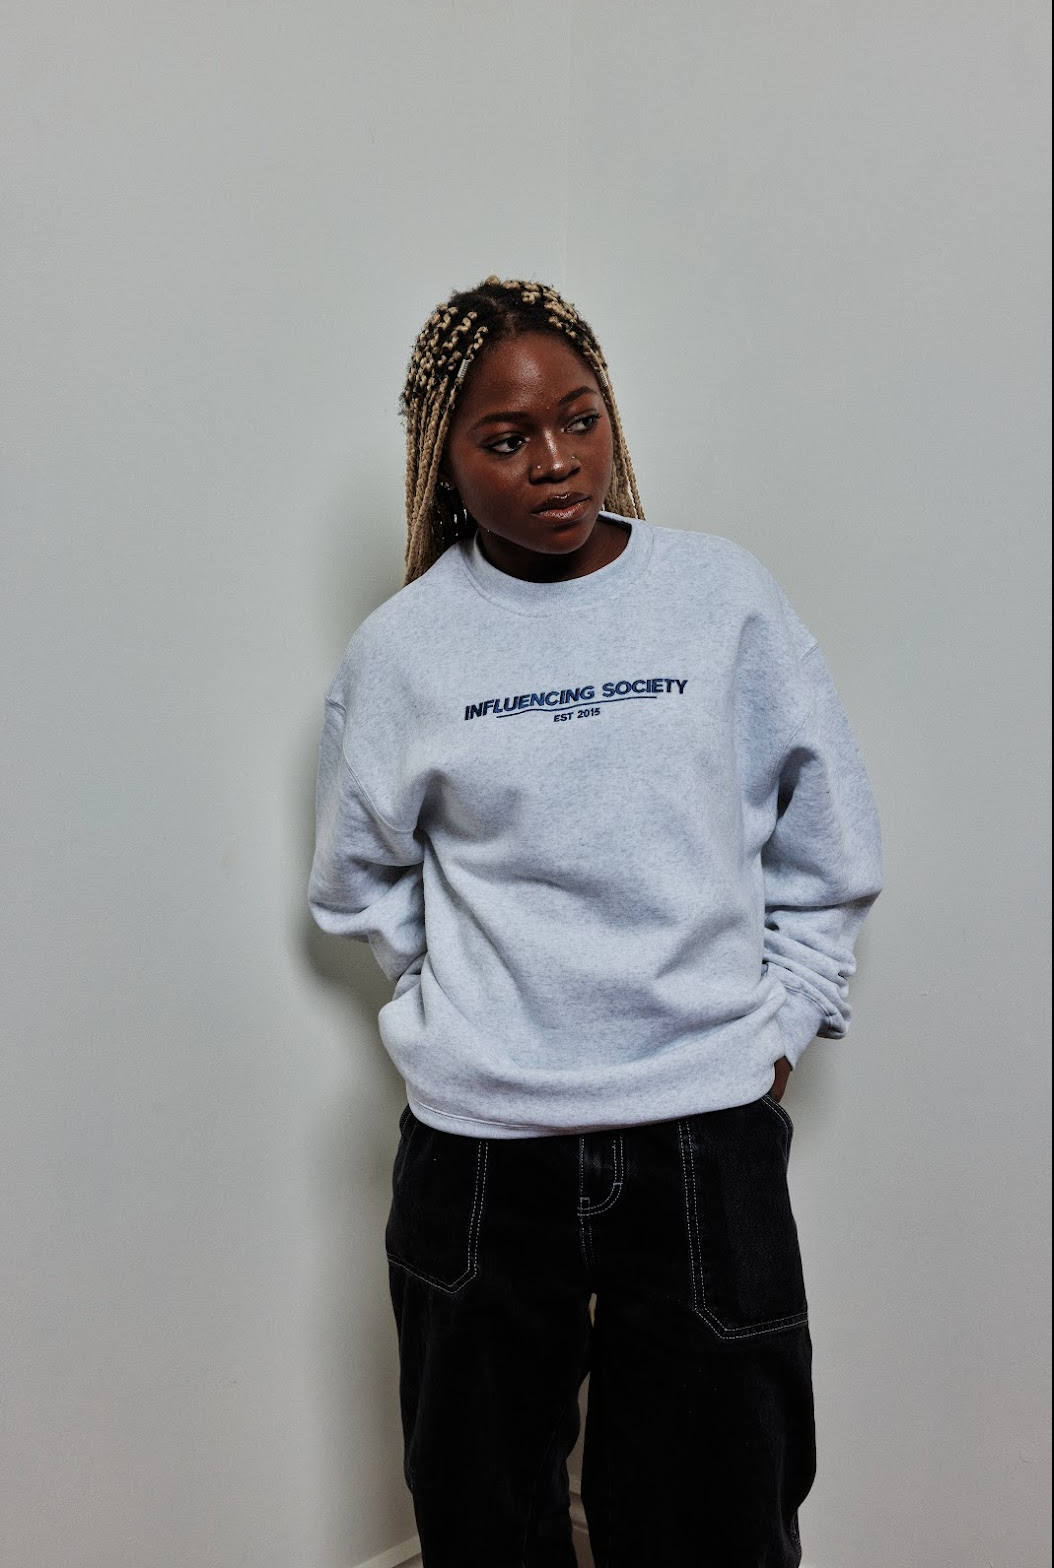 Influencing Society Crew Neck (White Marle)